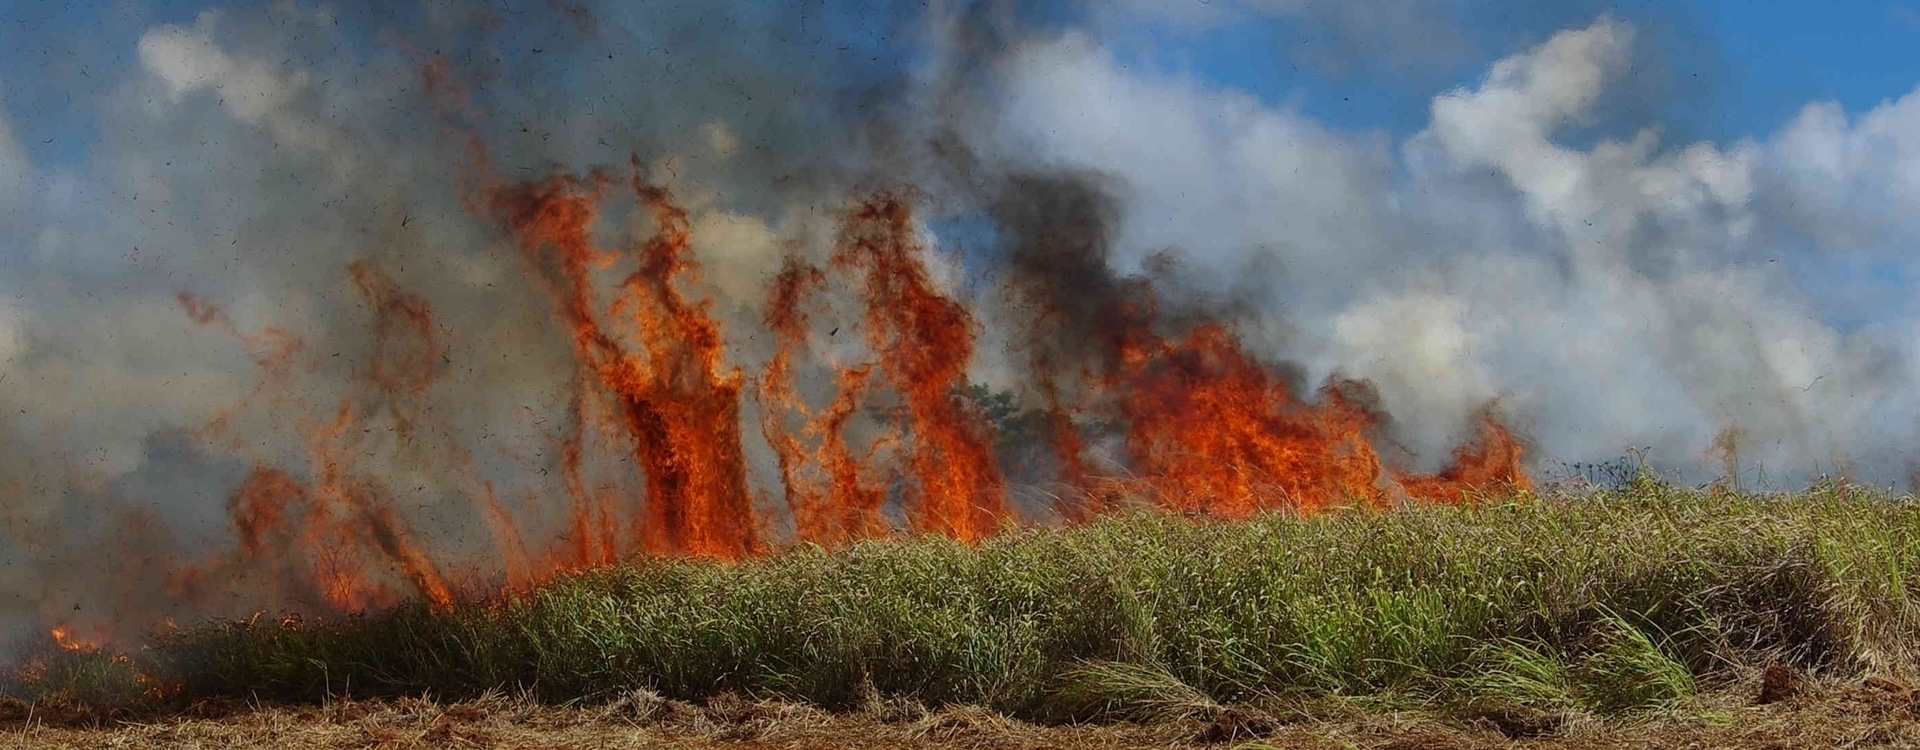 Invasive Grass-Wildfire Cycle